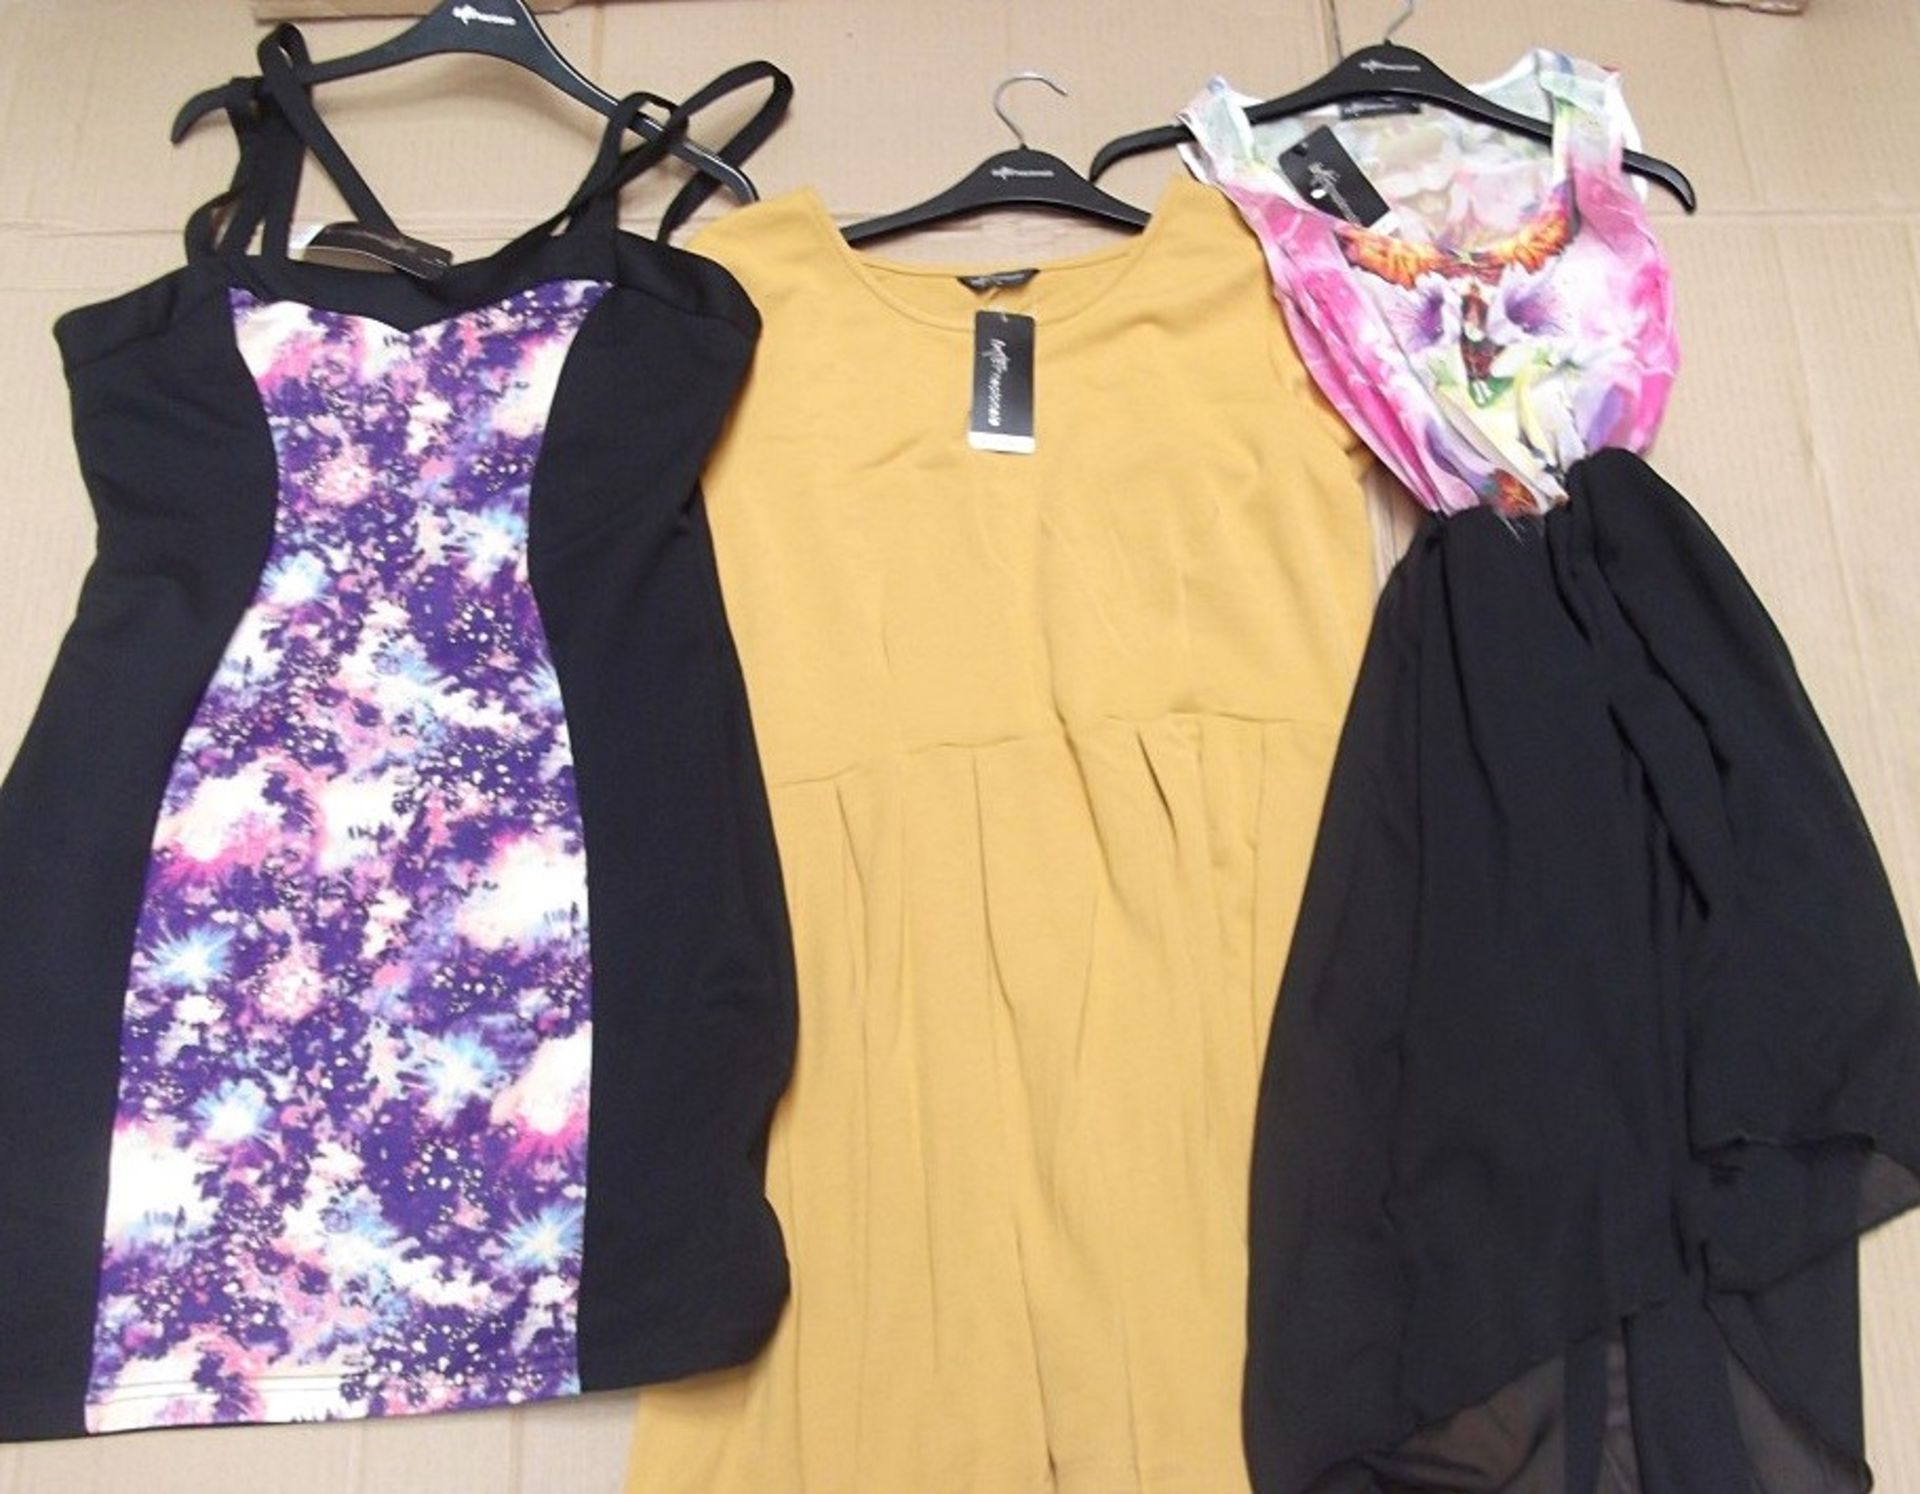 *MUST SEE* 66 x Assorted Ladies Dresses And Other Clothing - Includes 41 x Dresses, 19 x Tops, 5 x - Image 3 of 3